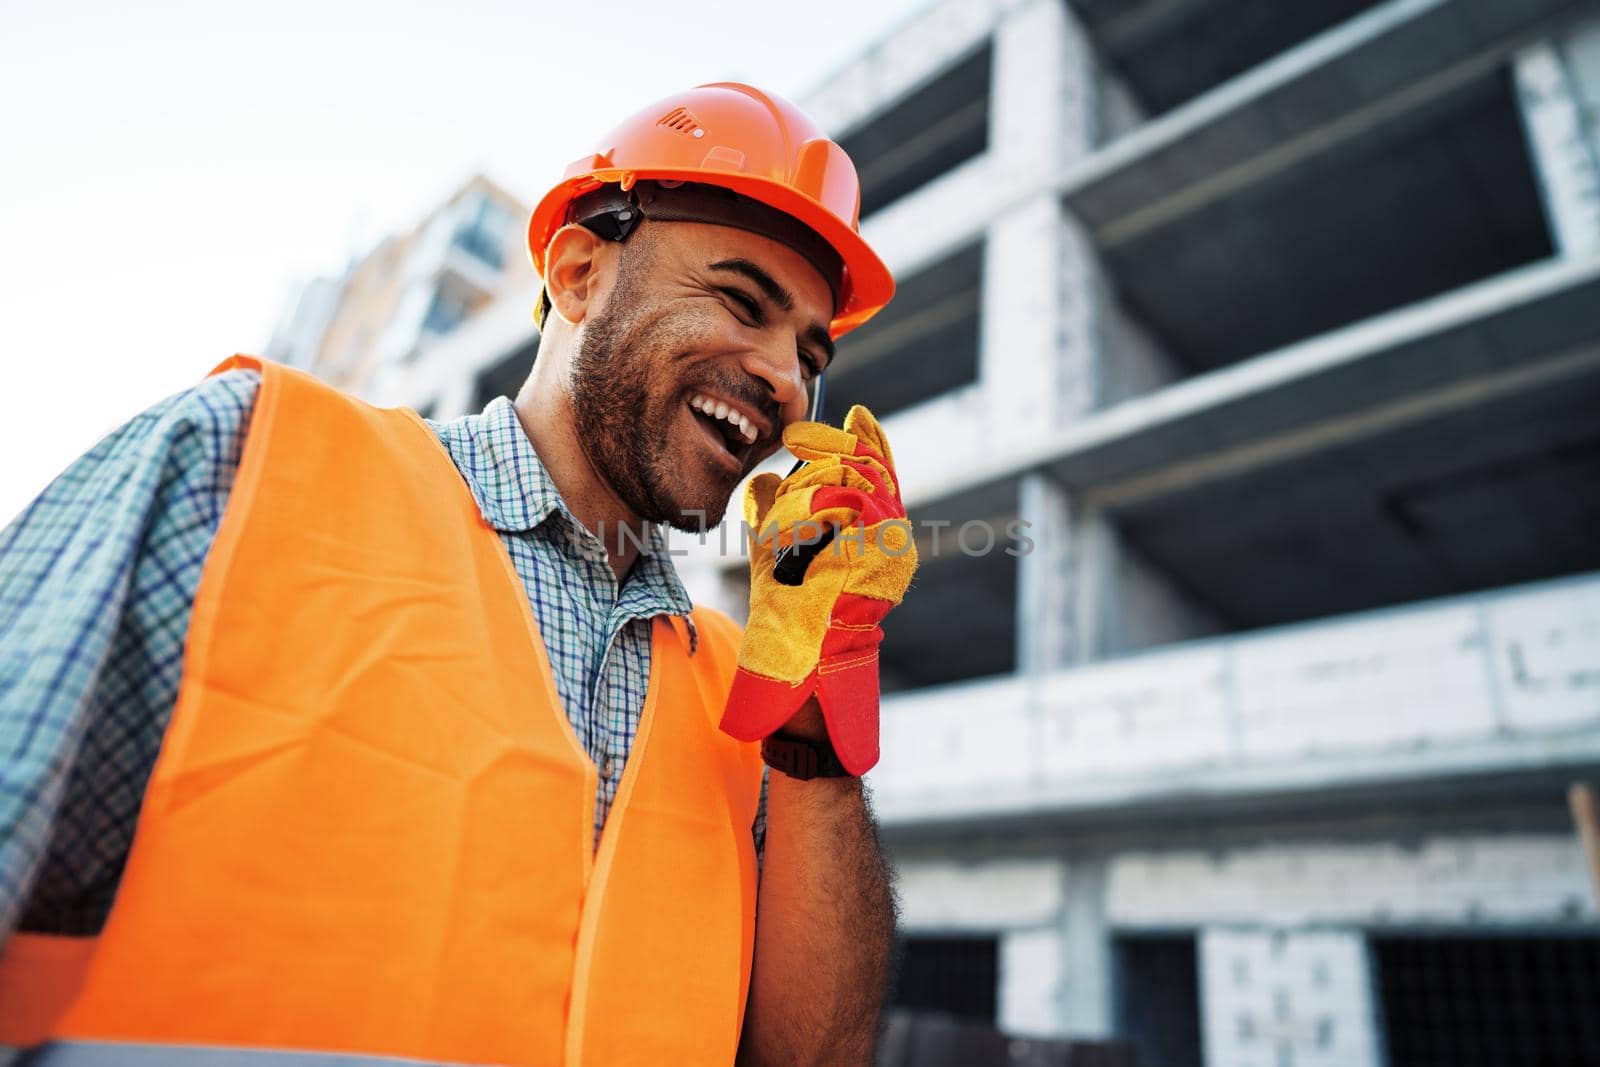 Young construction worker in uniform using walkie talkie on site, close up portrait